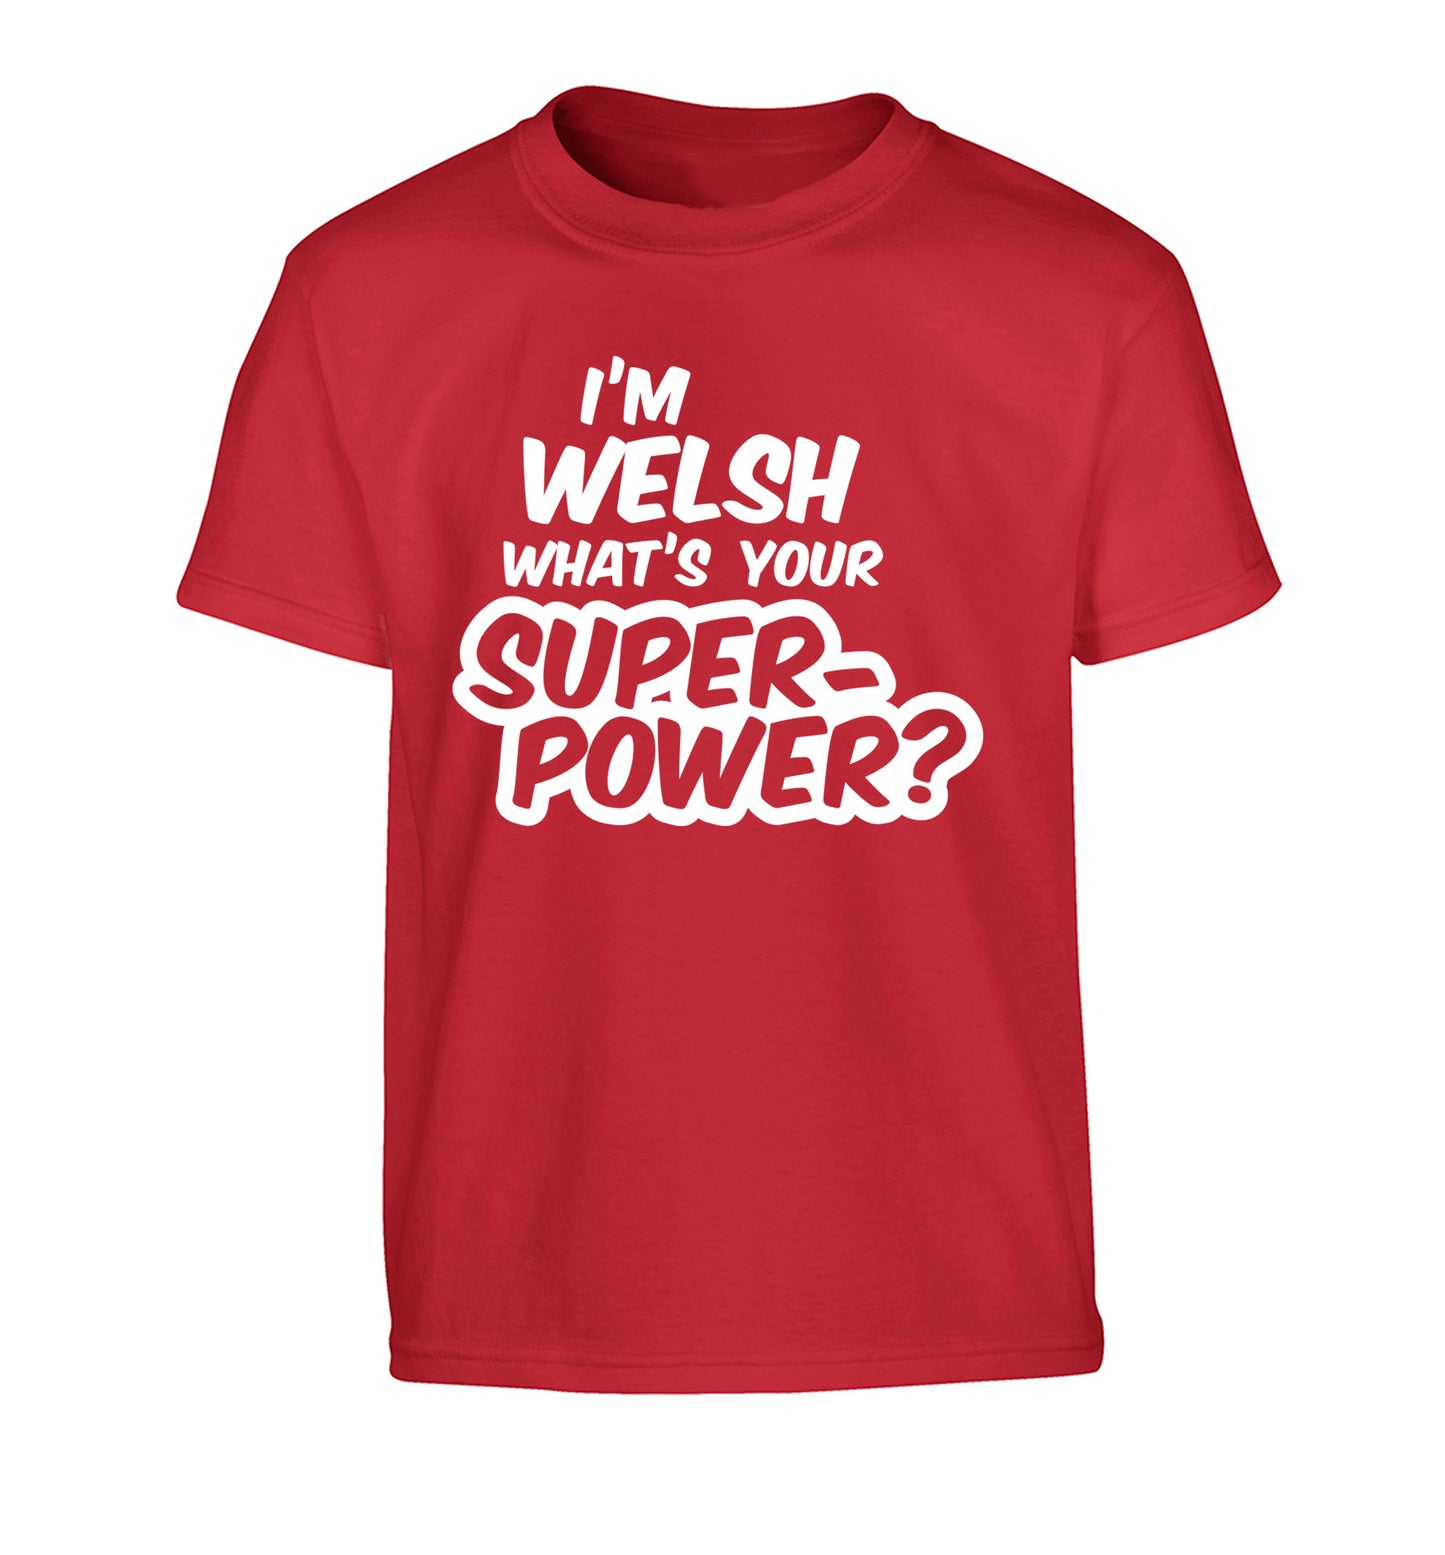 I'm Welsh what's your superpower? Children's red Tshirt 12-13 Years